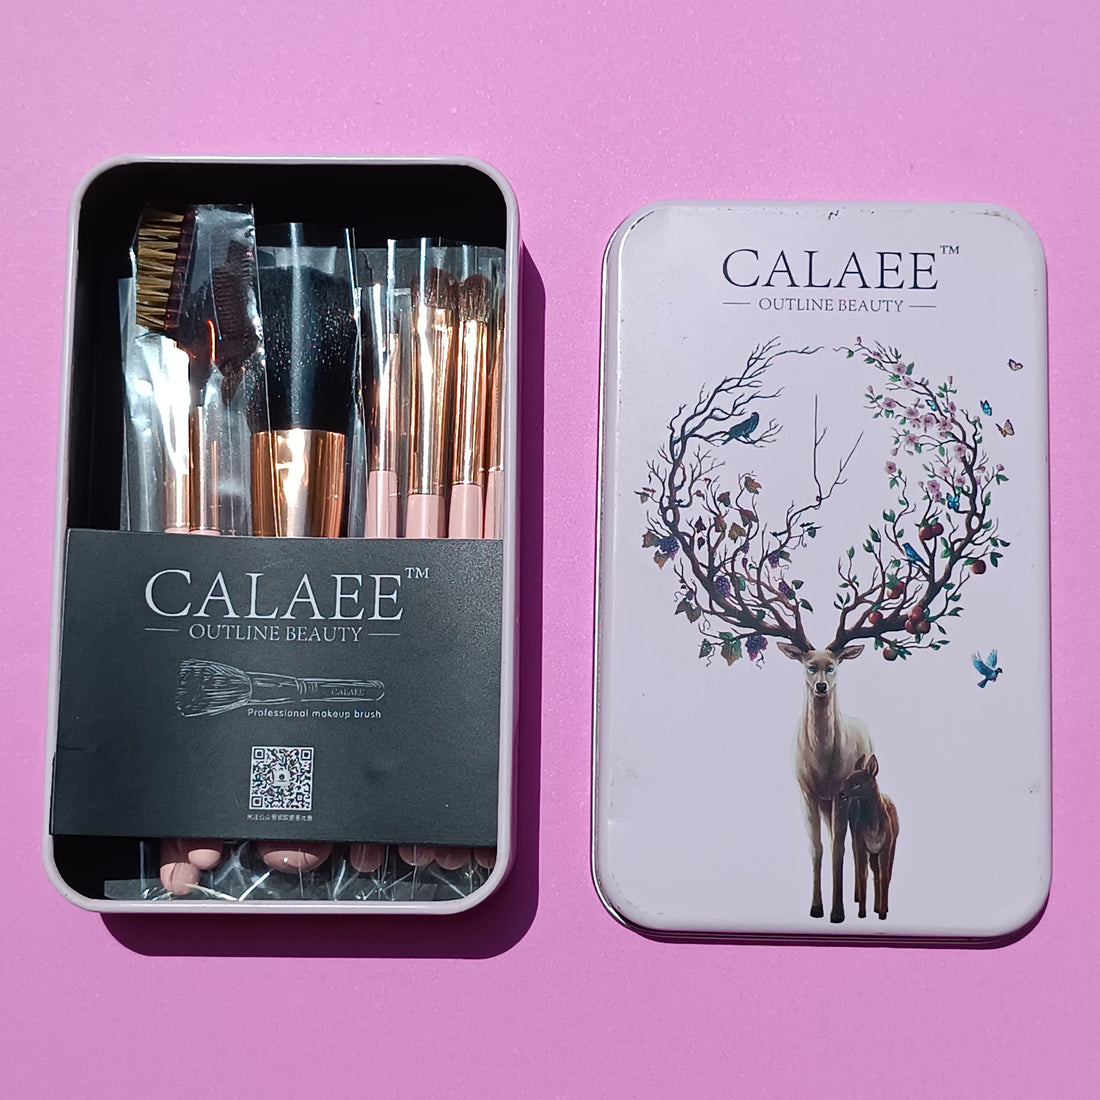 CALAEE Outline beauty Makeup brushes set 7pcs with box